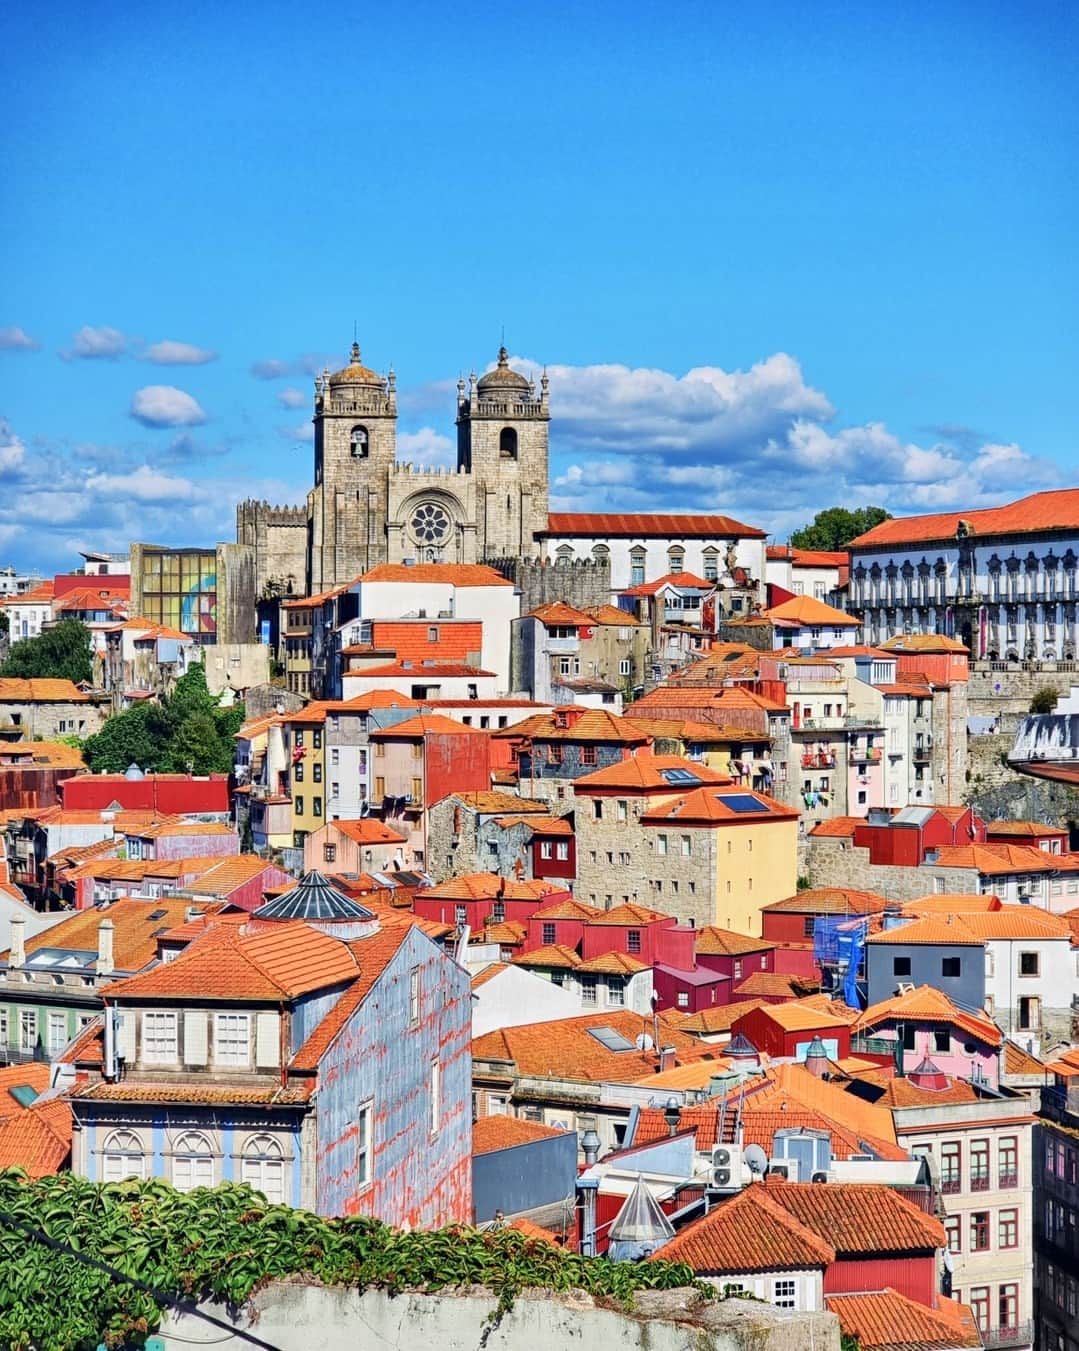 Rosetta Stoneさんのインスタグラム写真 - (Rosetta StoneInstagram)「#Porto is the second largest city in #Portugal with a ton of history and full of culture.  Here are 10 interesting things you might not know about Porto:  1. Porto was originally called Portus Cale, which influenced the name of the country Portugal. Historians argue the name comes from either: - The Gallaeci, a Celtic tribe of Iberia - A Celtic word meaning “port” (the place where boats dock) - The Greek word "Καλλις" meaning “beautiful” (referring to the beauty of the Douro valley) - The Latin word "calidus" meaning "warm" ("Portus Cale" thus meaning "warm port")  2. While Porto developed in the 4th century ACE, the earliest evidence of settlers dates back to the 8th century BCE. This makes Porto one of the oldest European cities.  3. Porto is fondly called “Invicta”, which means "invincible" in Portuguese. This nickname comes from the 19th century Portuguese civil war when the enemy failed to conquer the city.  4. In 1415, Porto residents donated all of their meat reserves to soldiers for the conquest of Ceuta, which left them with only animal tripe to eat. After that, the people of Porto were called "Tripeiros" (tripe-eaters). The nickname stuck and is still used today.   5. Porto is known as the city of bridges due to its 6 iconic bridges that span the Douro River.   6. The Sao Bento train station in Porto is considered one of the most beautiful train stations in the world.  7. Port wine comes from this region. This fortified wine is widely accepted as the city’s dessert wine, especially as it is made along the Douro River.  8. A Francesinha is the city’s typical dish. This sandwich is made with different kinds of meat and sausage, cheese, and a delicious tomato beer sauce.  9. One of the largest street festivals in the world takes place in Porto on June 23 to celebrate the patron saint of the city – Saint John. Quirky traditions during Festa de São João do Porto include smashing each other's head with plastic hammers, jumping over bonfires (to prove your courage), and offering friends basil plants decorated with handwritten poems.  10. The historic center of Porto was declared a World Heritage Site by UNESCO in 1996.  Will you add Porto to your #bucketlist?」4月17日 0時06分 - rosettastone